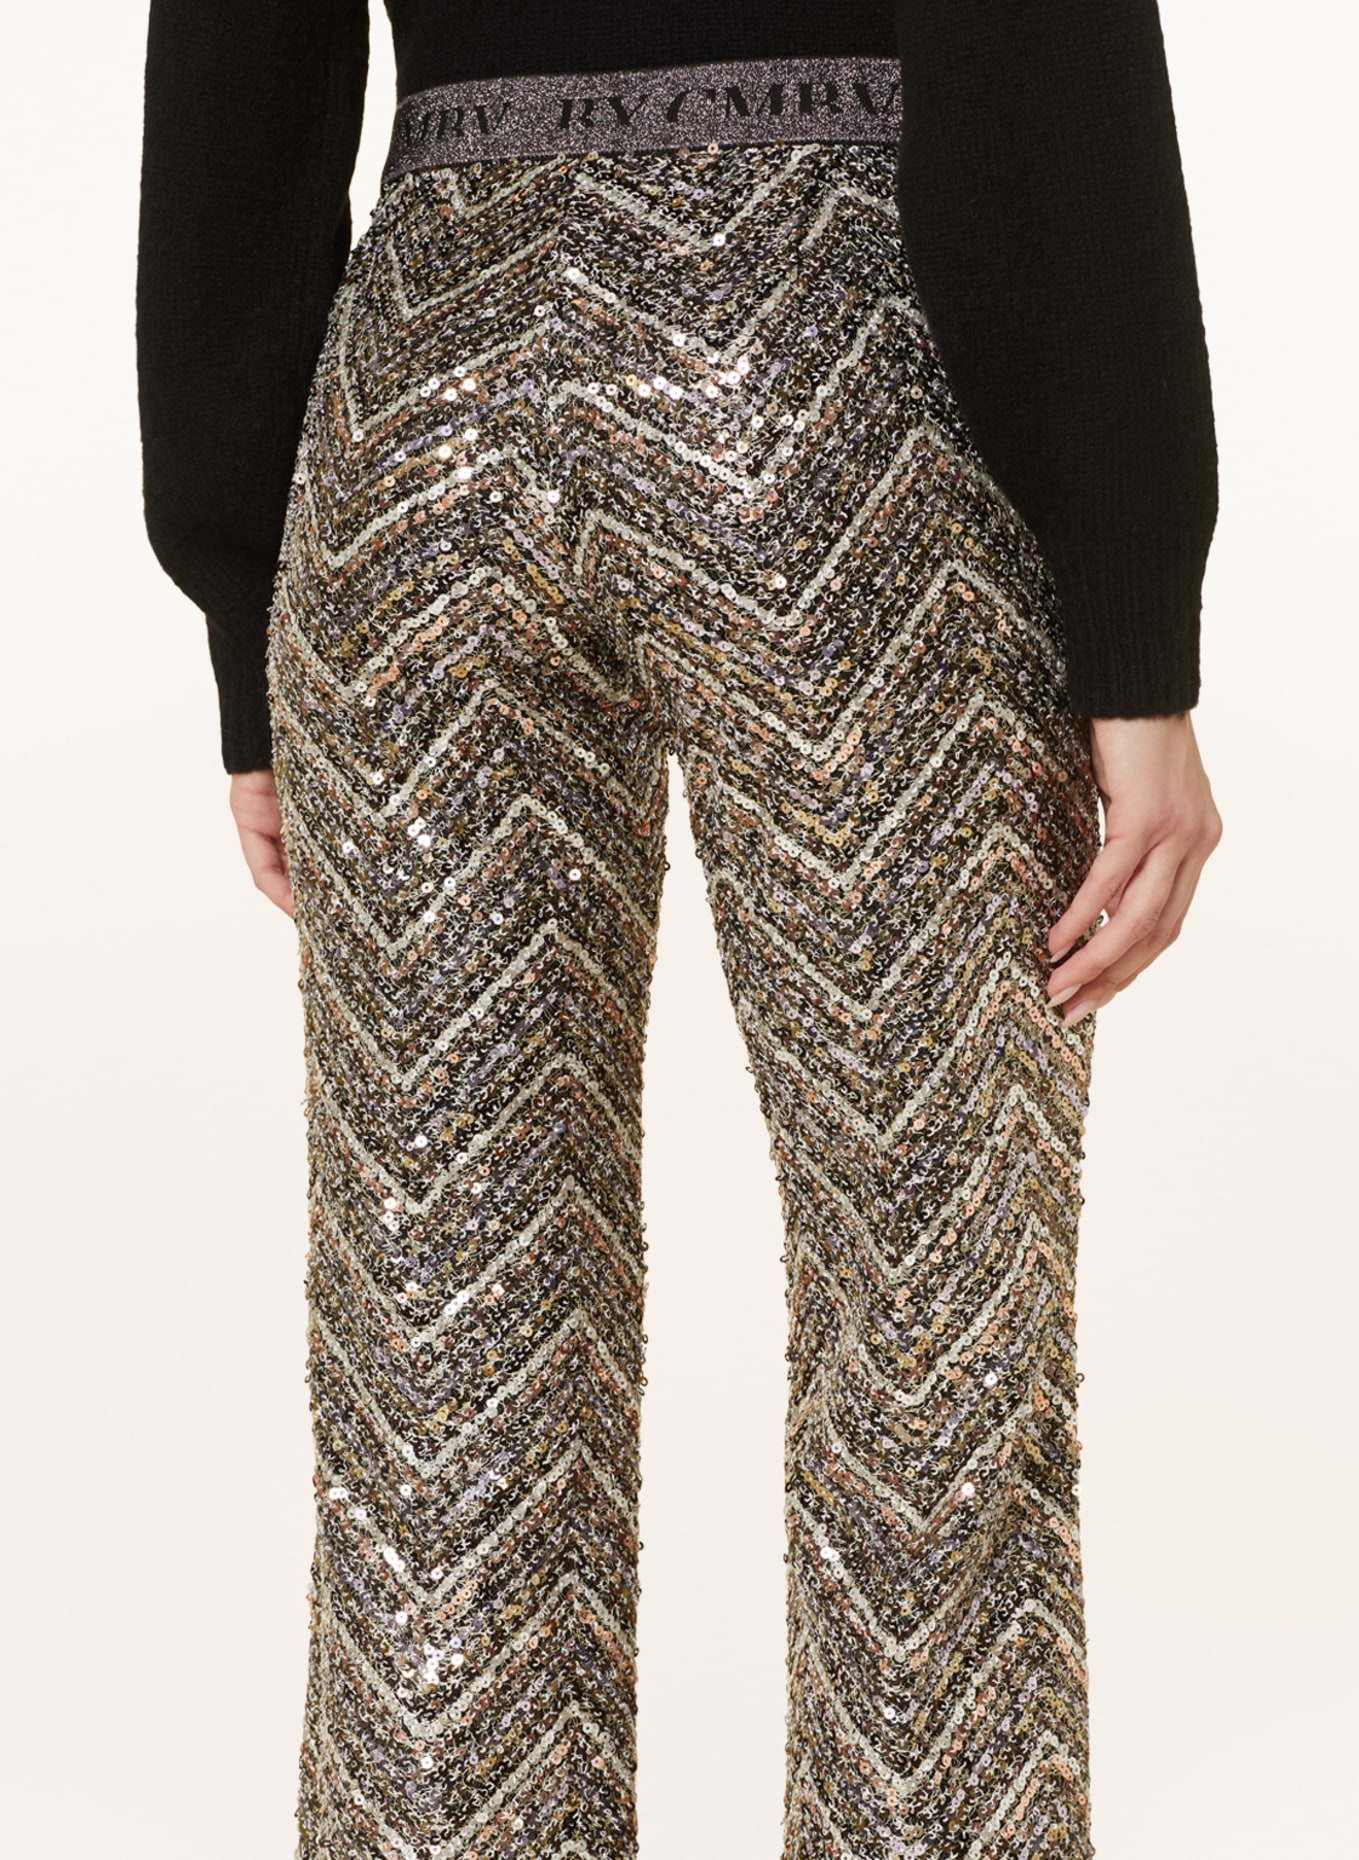 CAMBIO Trousers FRANCIS with sequins, Color: BLACK/ CREAM/ GOLD (Image 5)